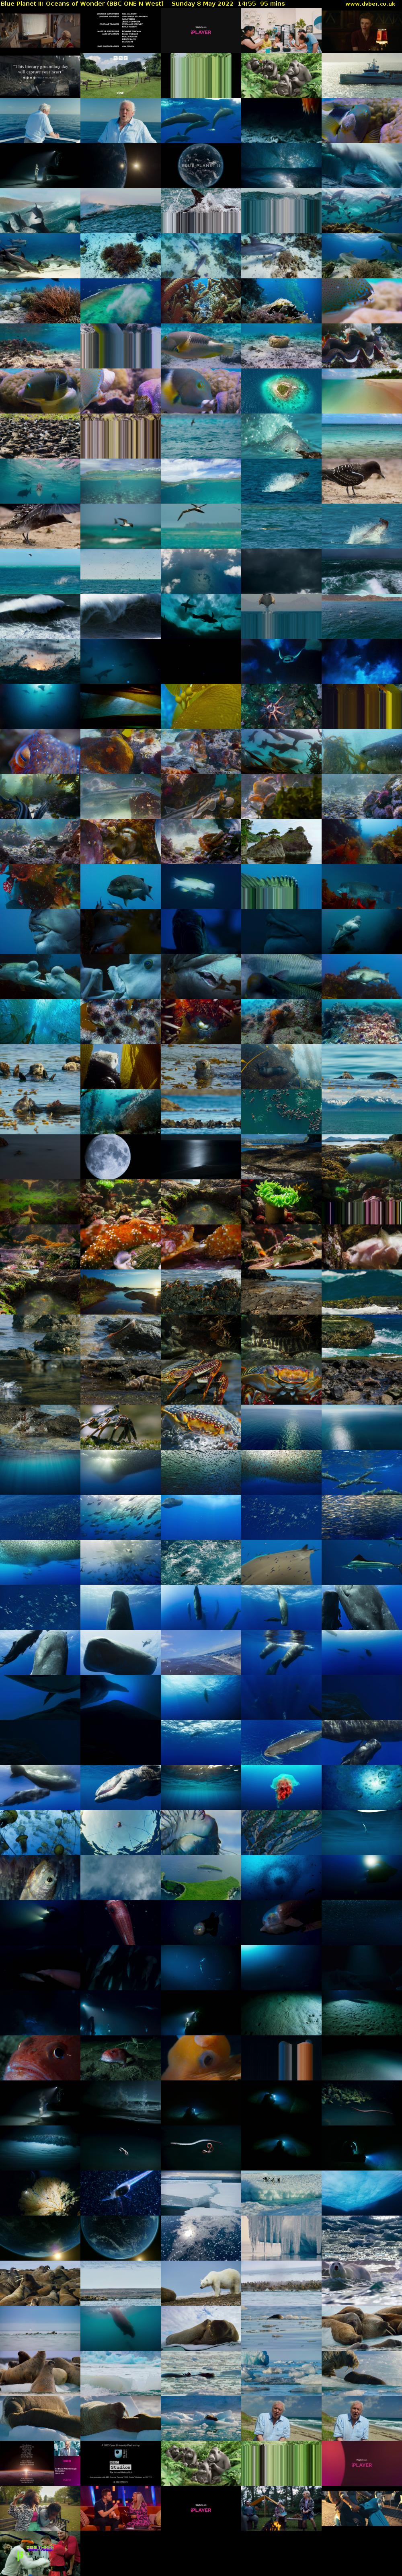 Blue Planet II: Oceans of Wonder (BBC ONE N West) Sunday 8 May 2022 14:55 - 16:30